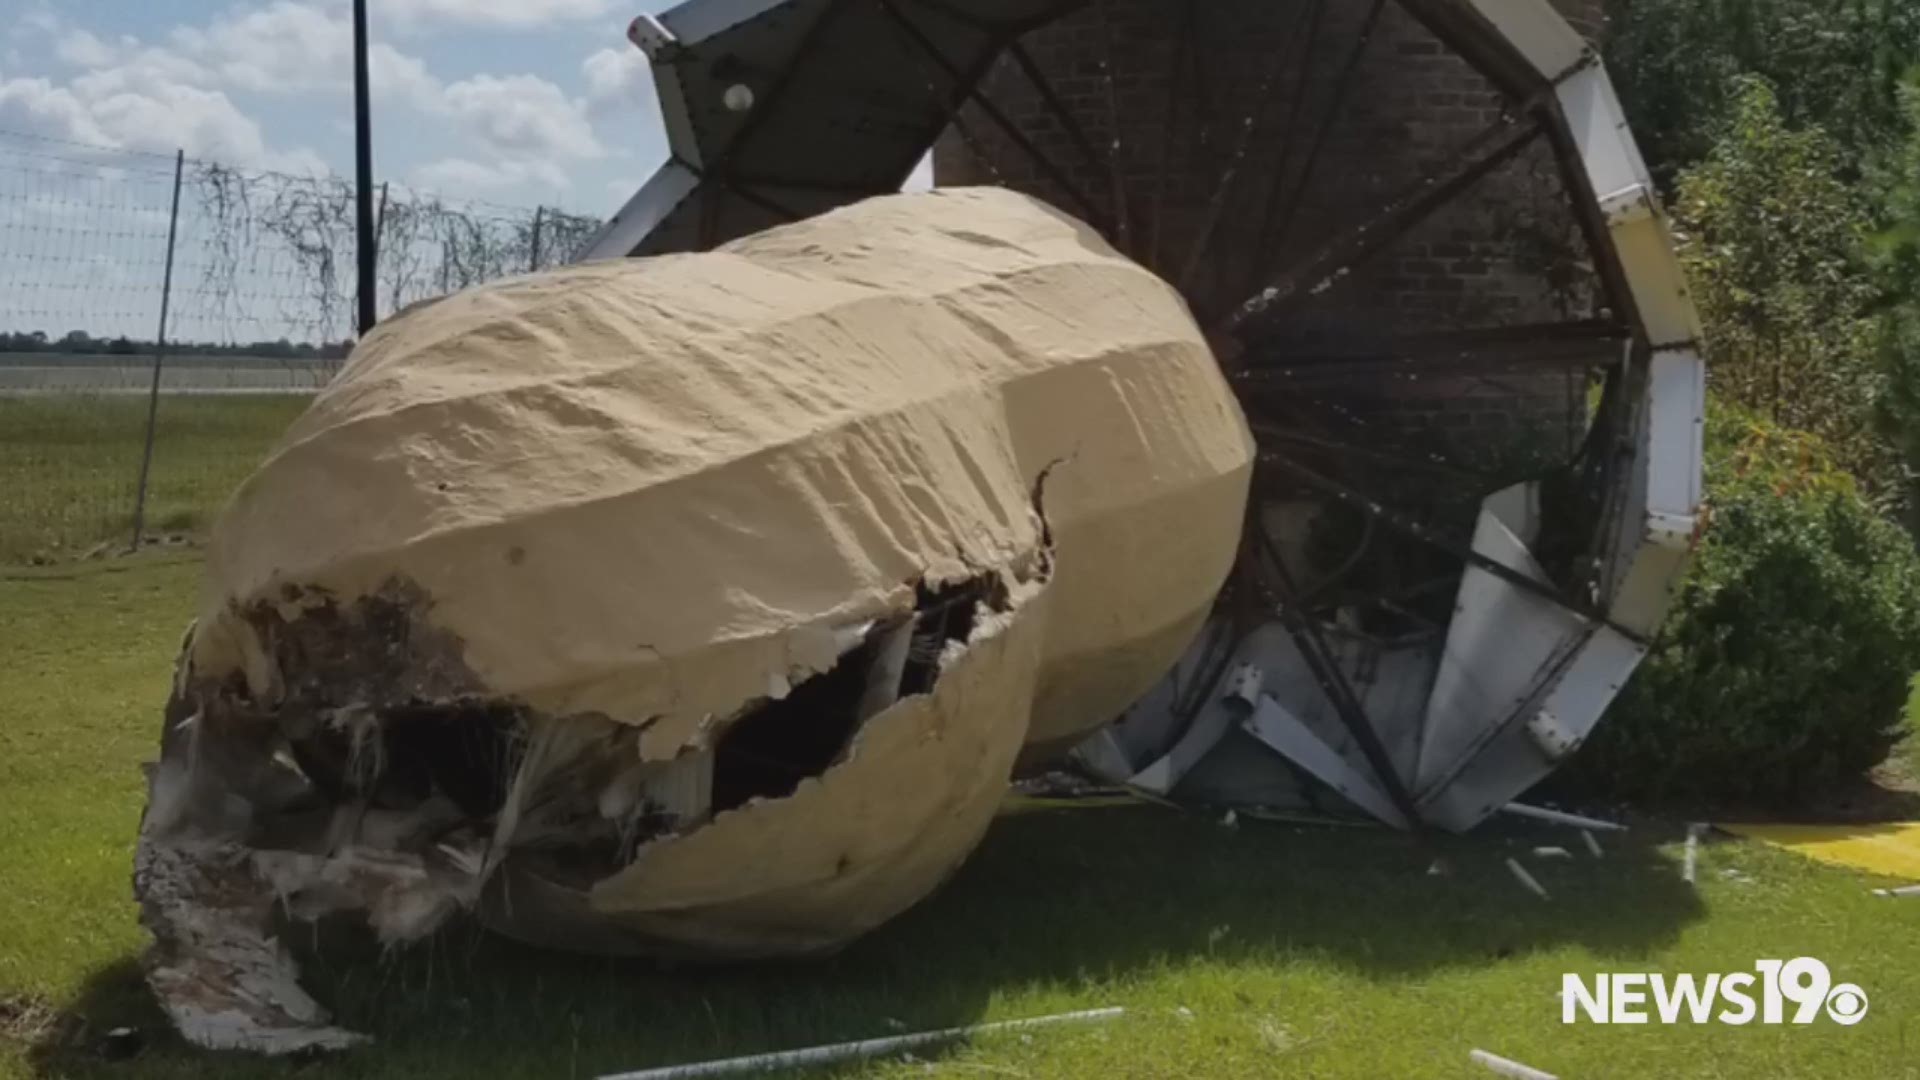 The ?World?s Largest Peanut? in Ashburn, Georgia was damaged by Hurricane Michael?s winds.